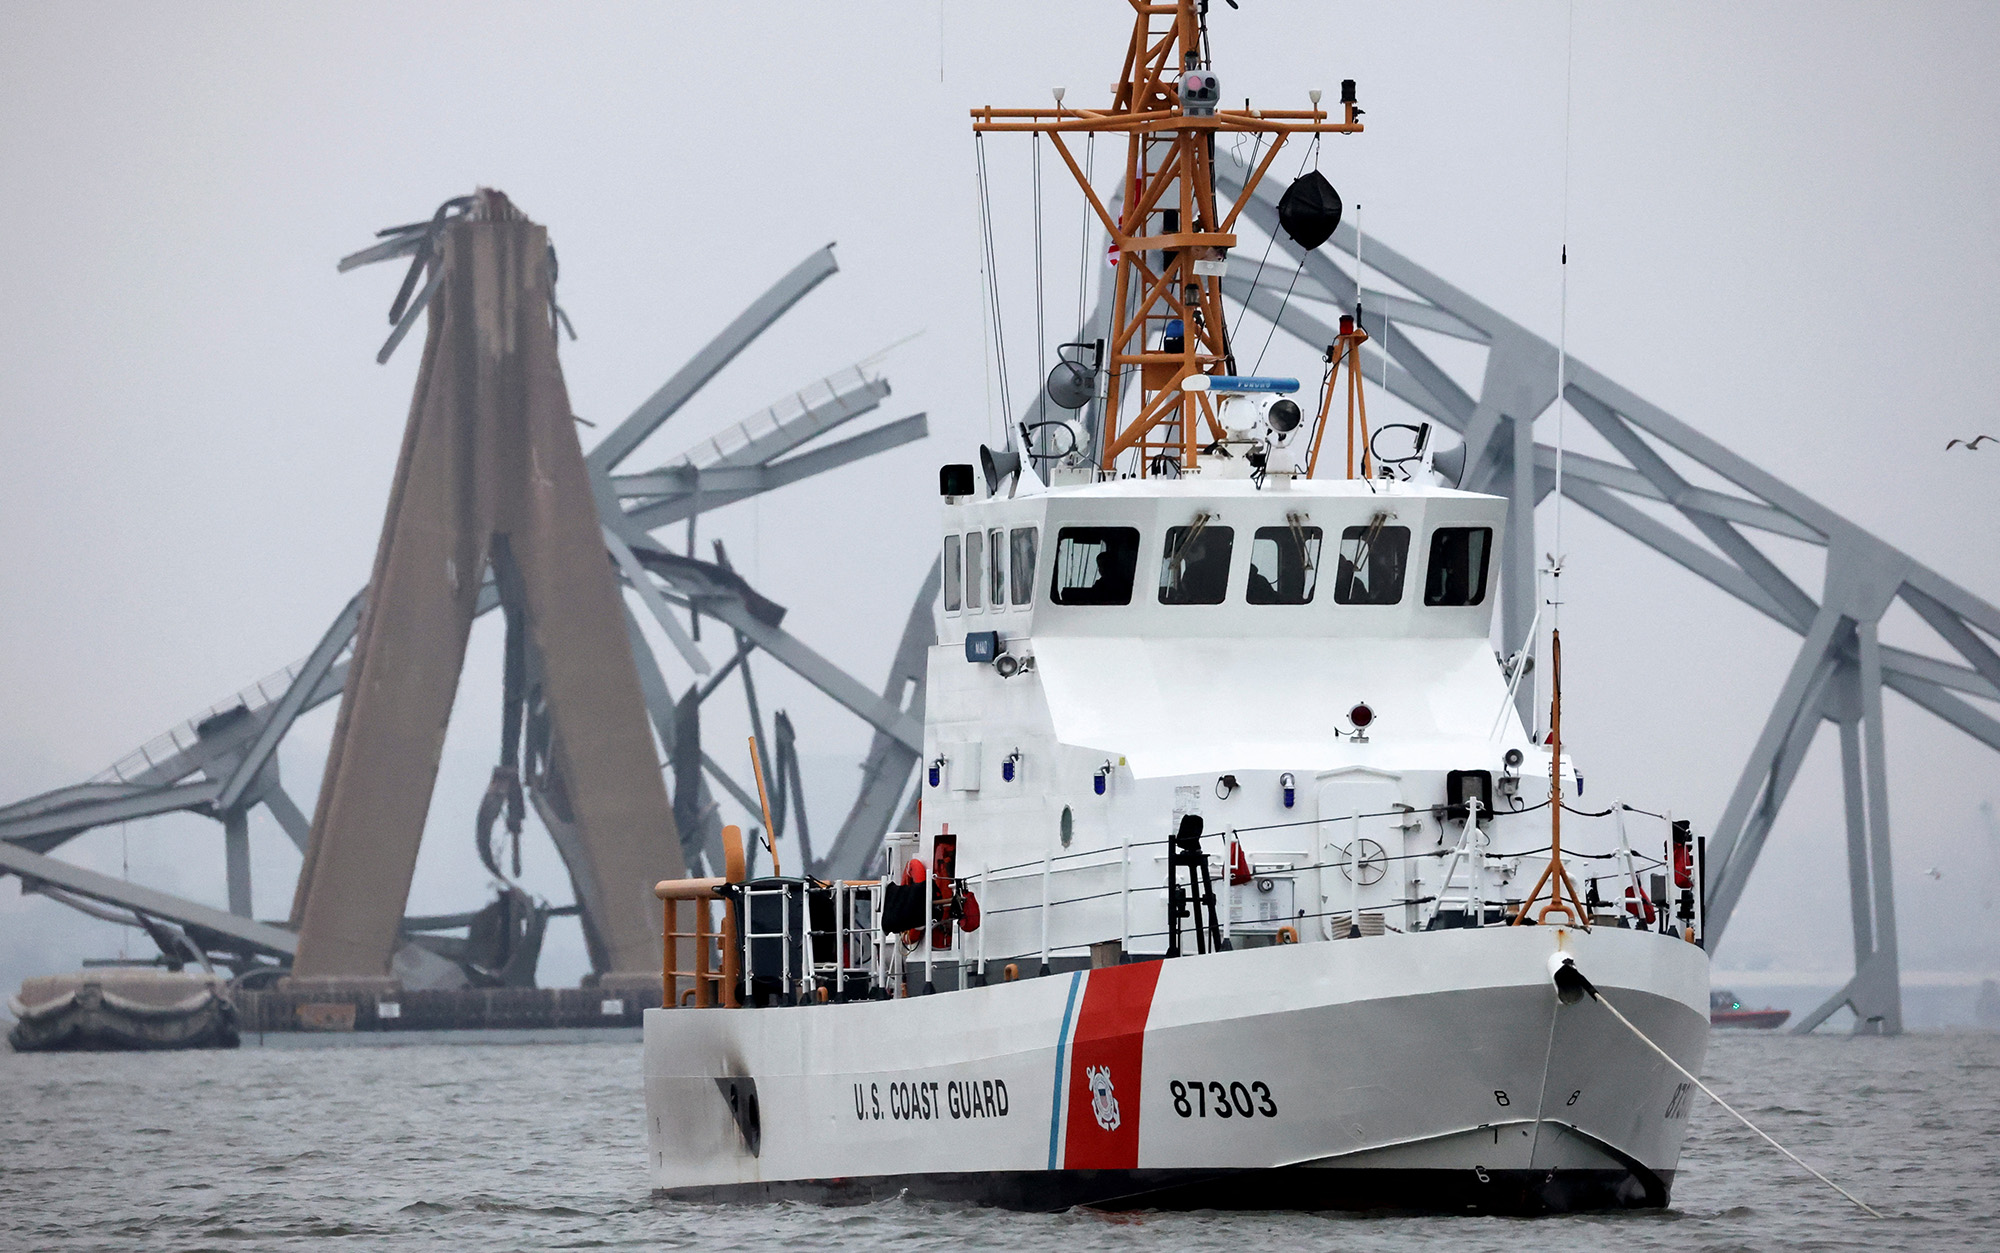 A U.S. Coast Guard vessel sails near the Francis Scott Key Bridge, after the Dali cargo vessel crashed into it causing it to collapse, in Baltimore, Maryland, on March 27.